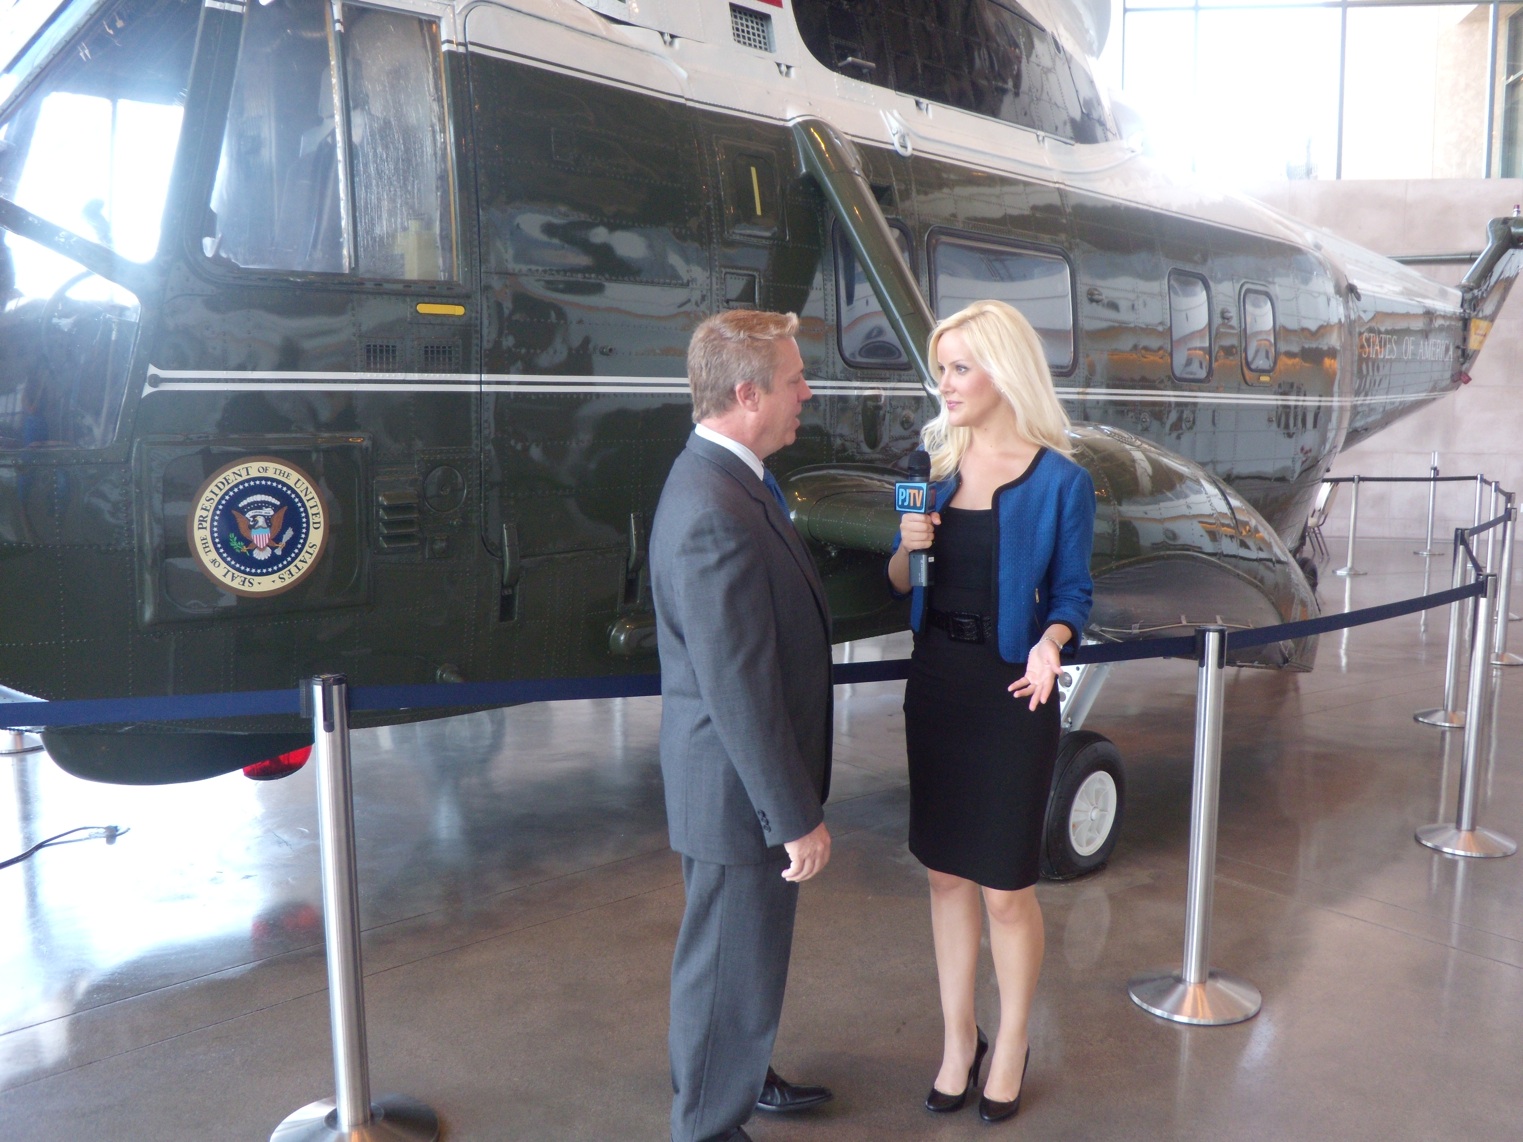 Reporting for PJTV at the Reagan Library